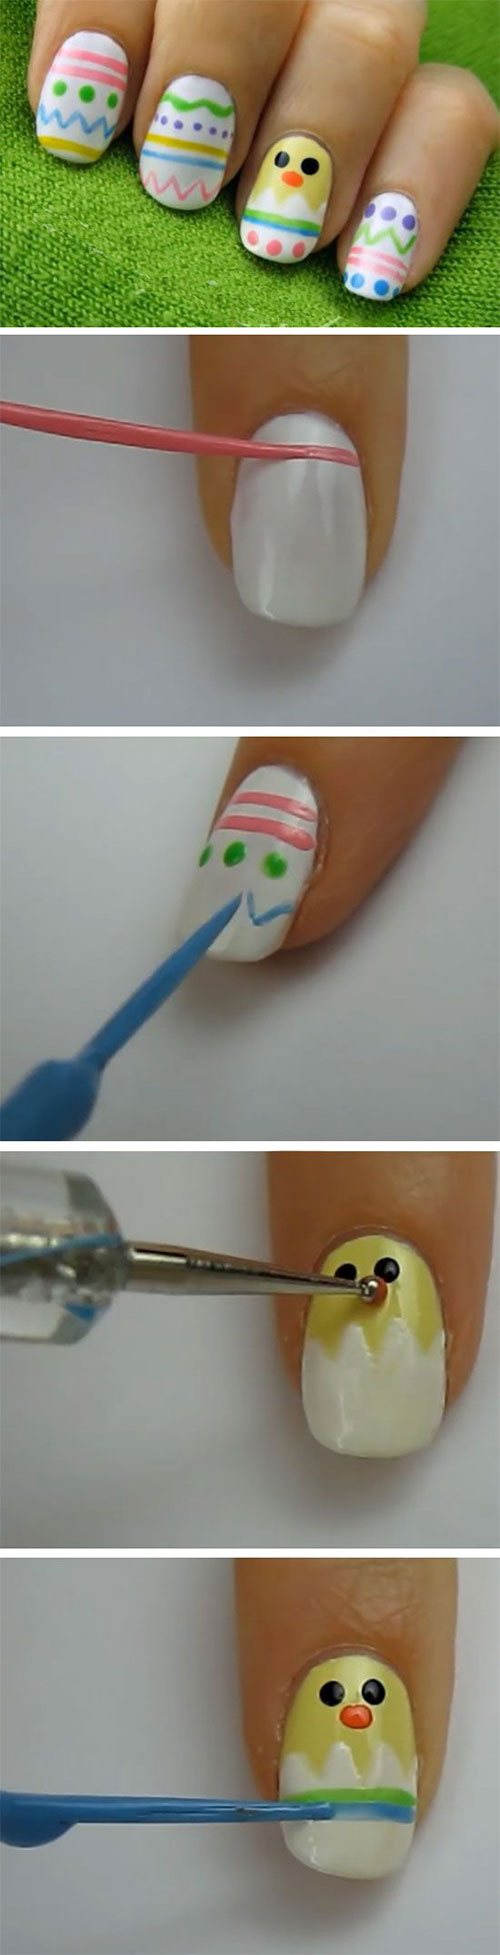 18-Easter-Nail-Art-Tutorials-For-Beginners-Learners-2016-15